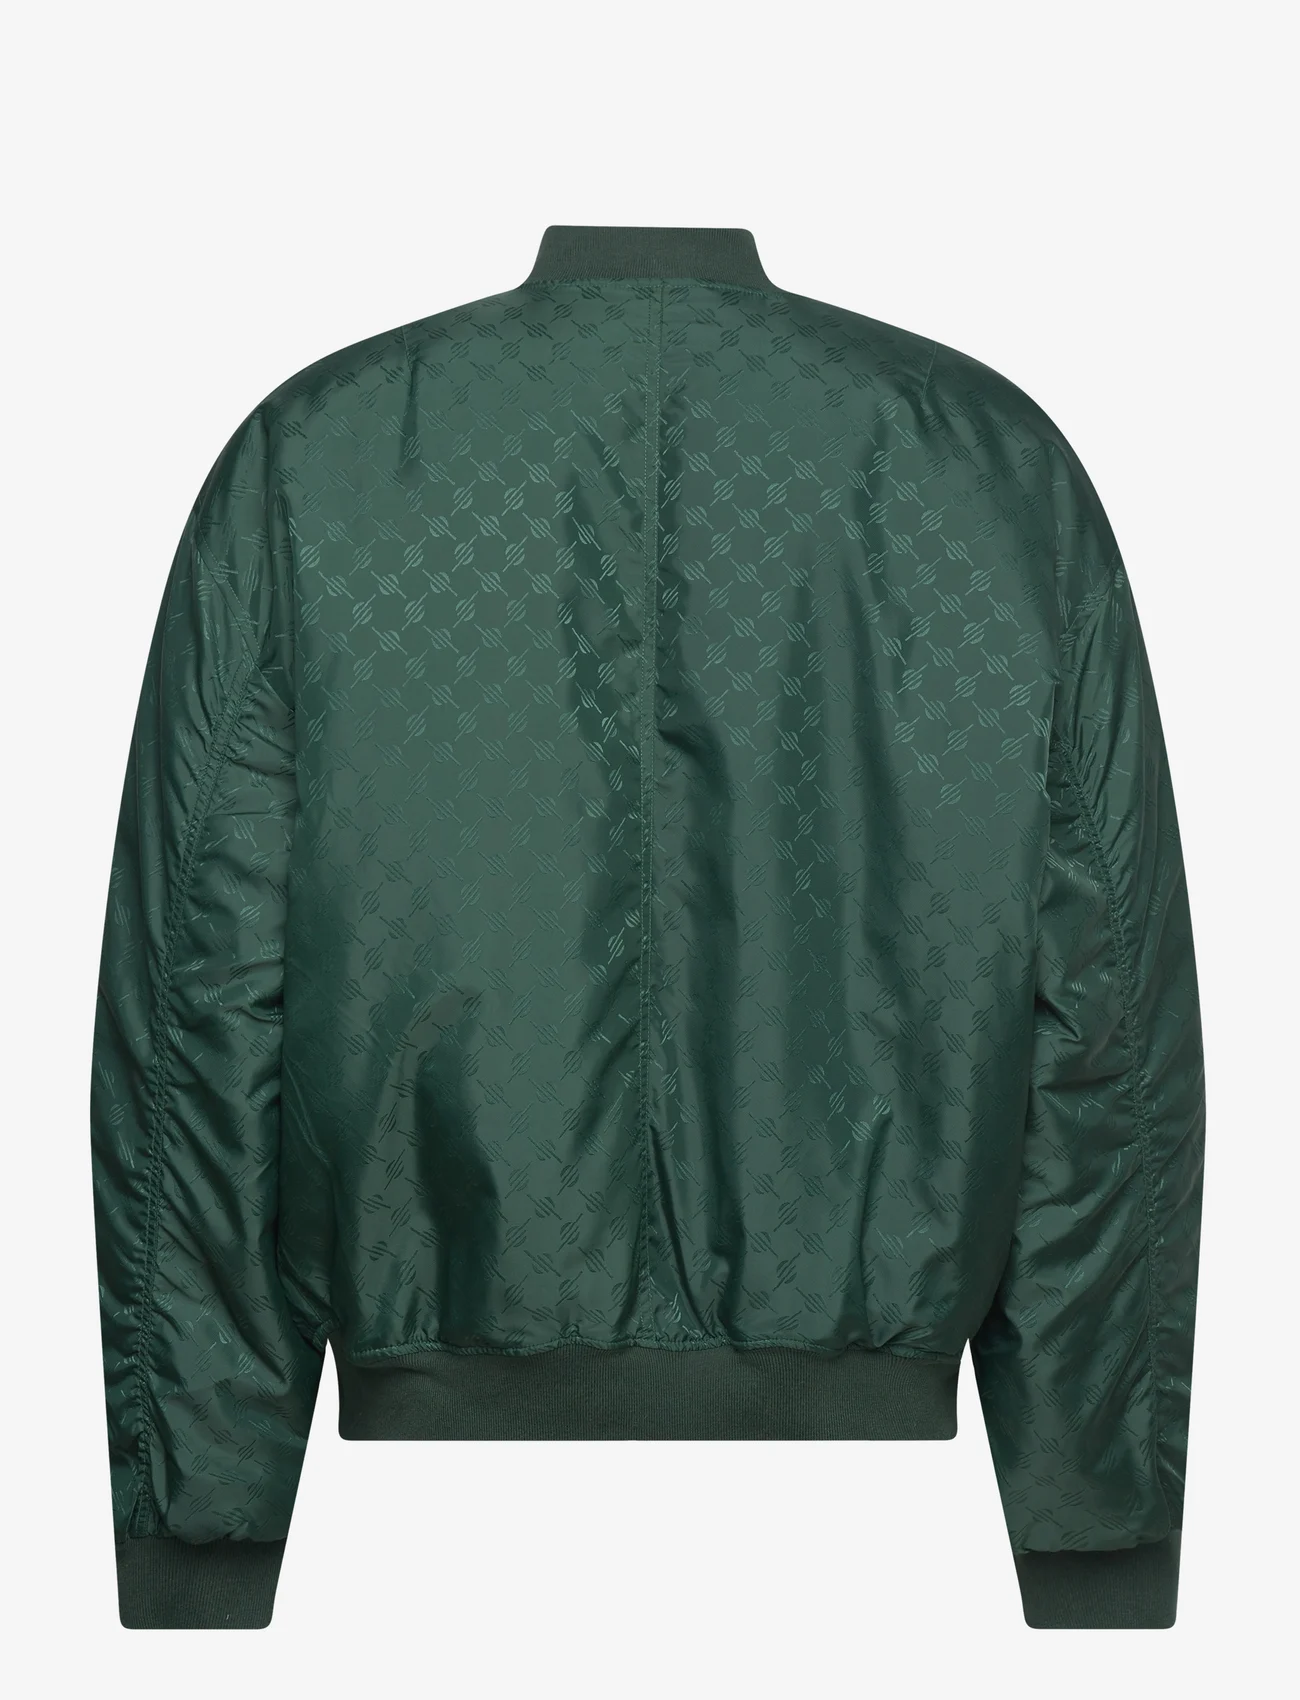 Daily Paper - ronack jacket - spring jackets - pine green - 1